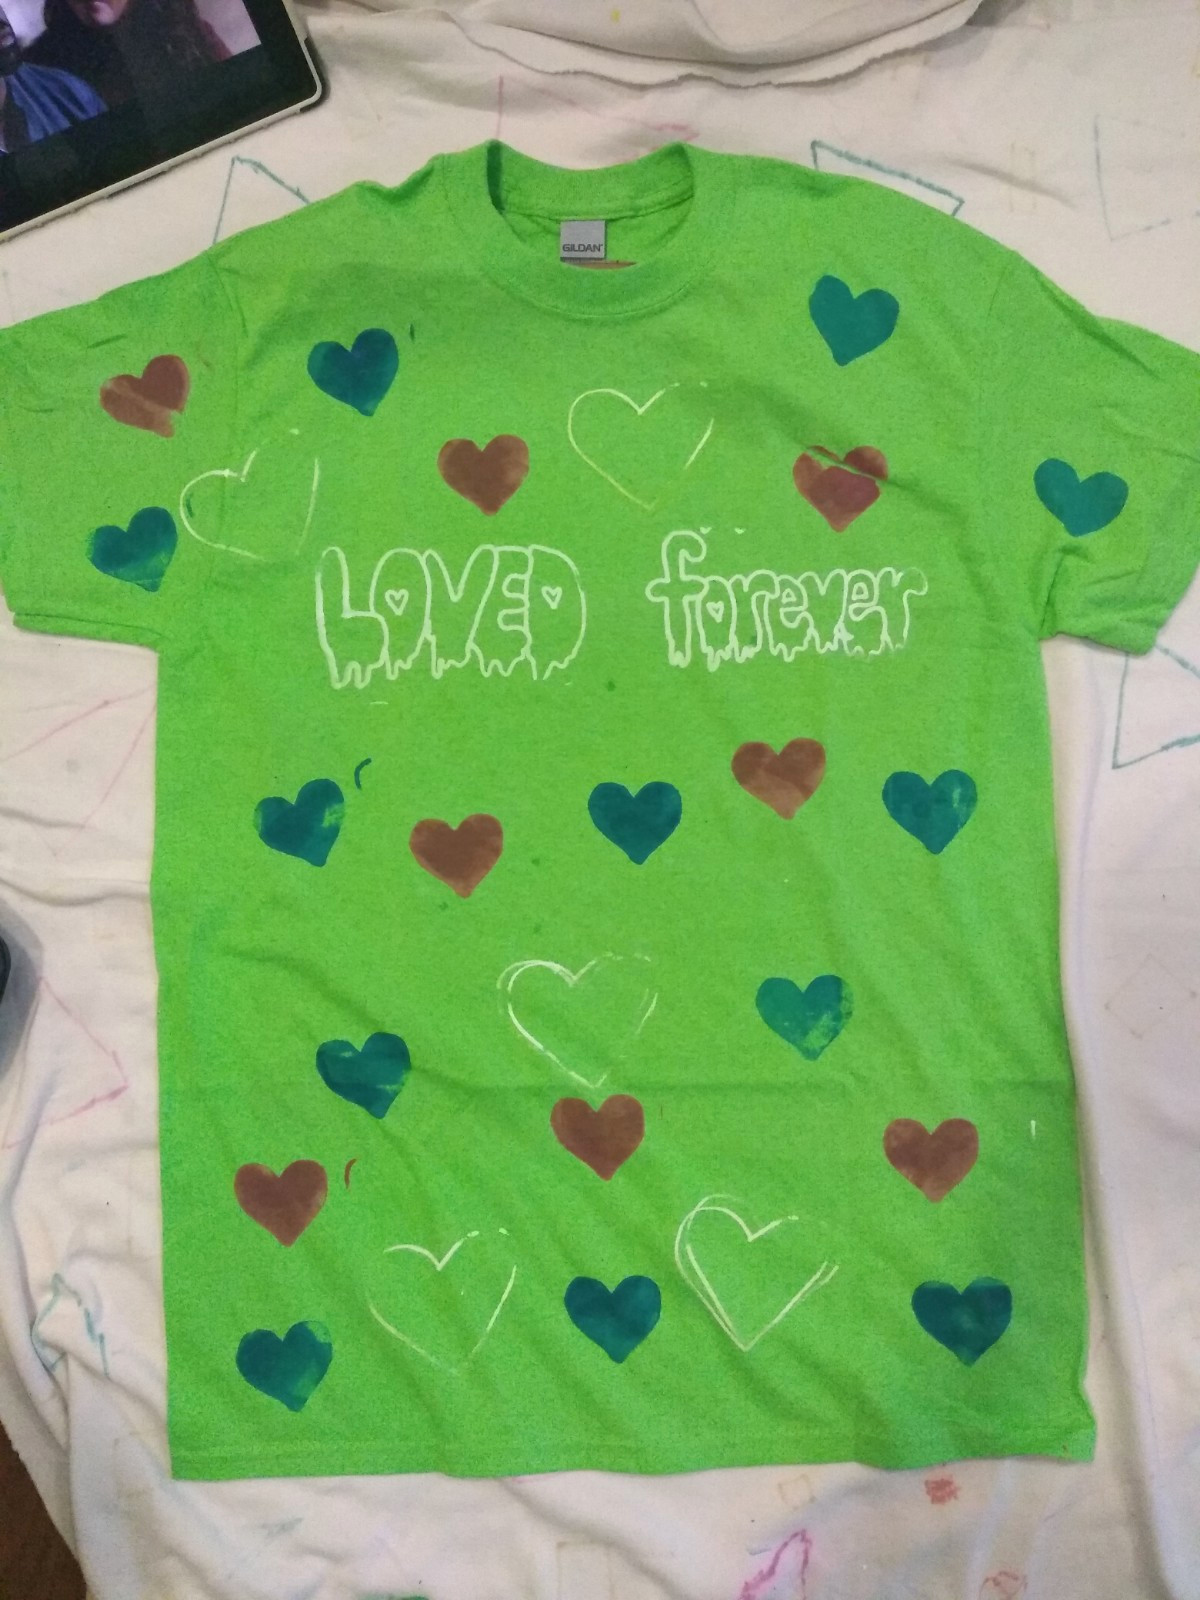 Green shirt lay flat with printed hearts with text, Loved forever